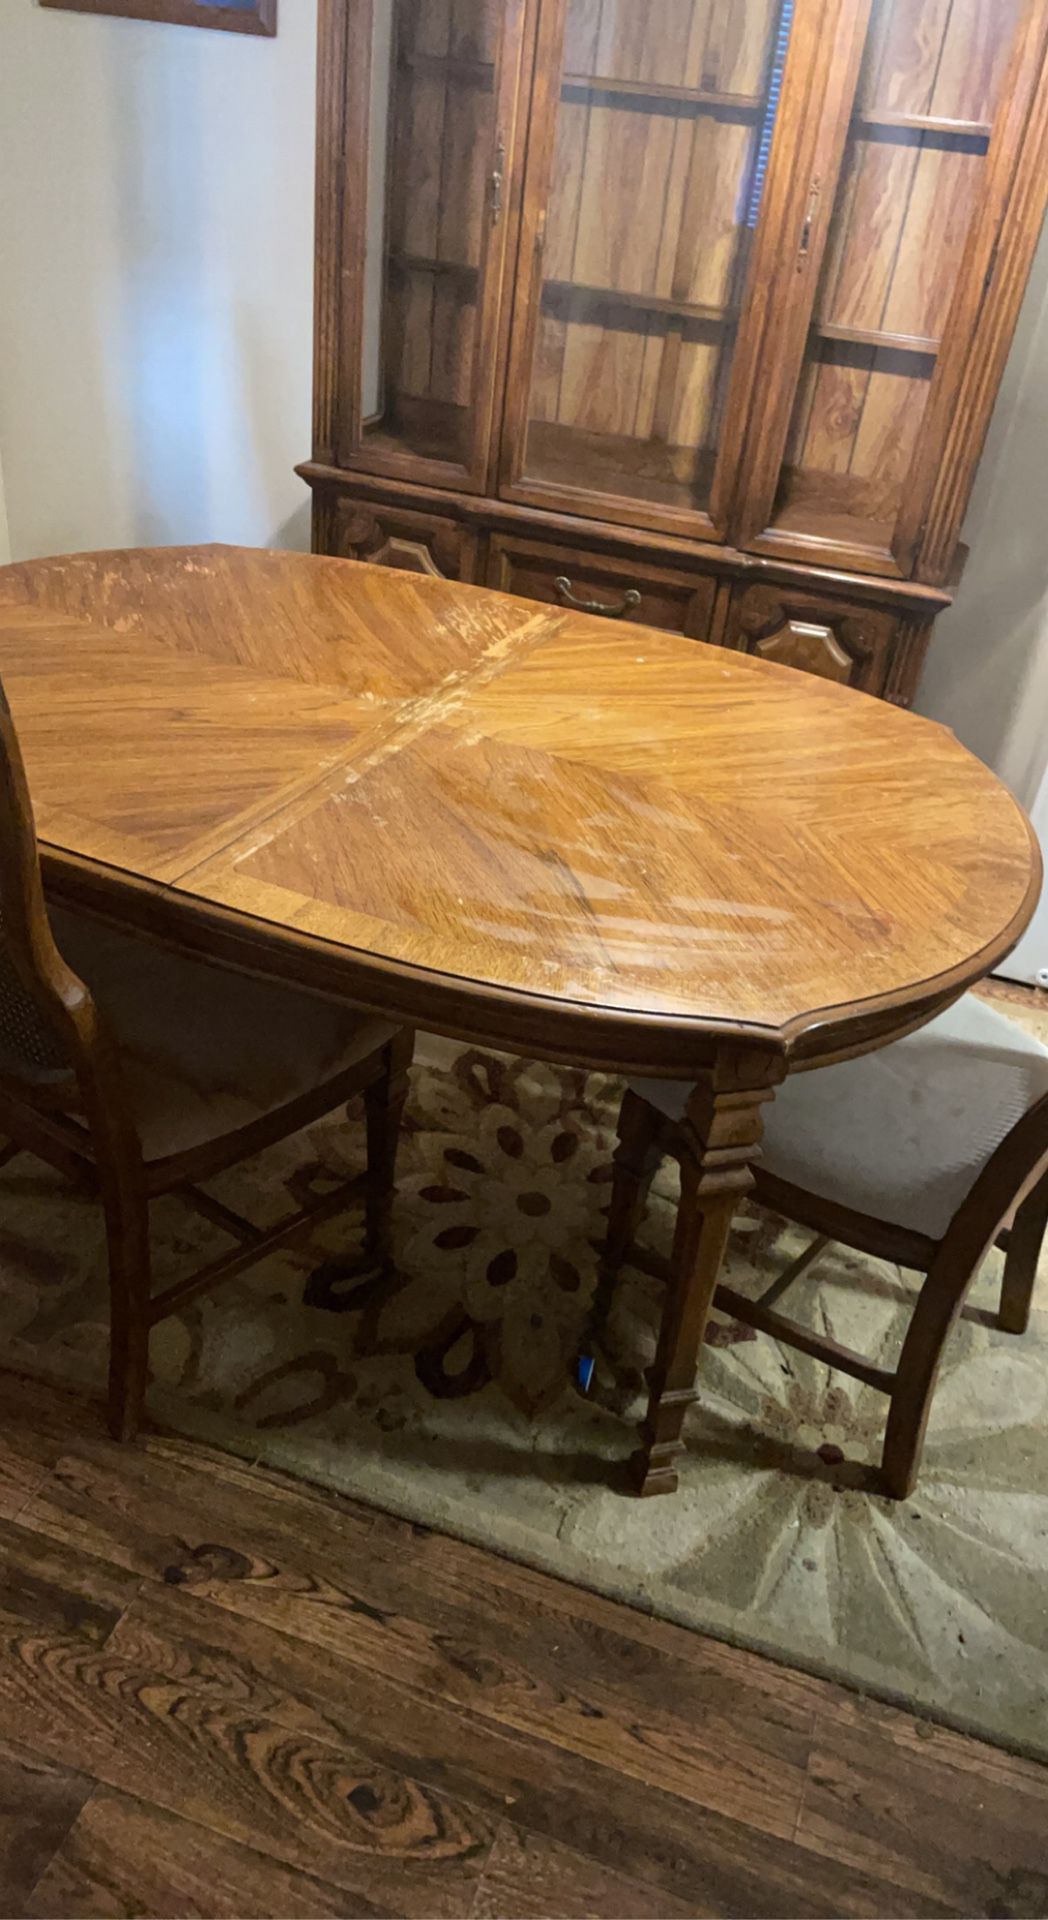 Dining Room Table And 4 Chairs 